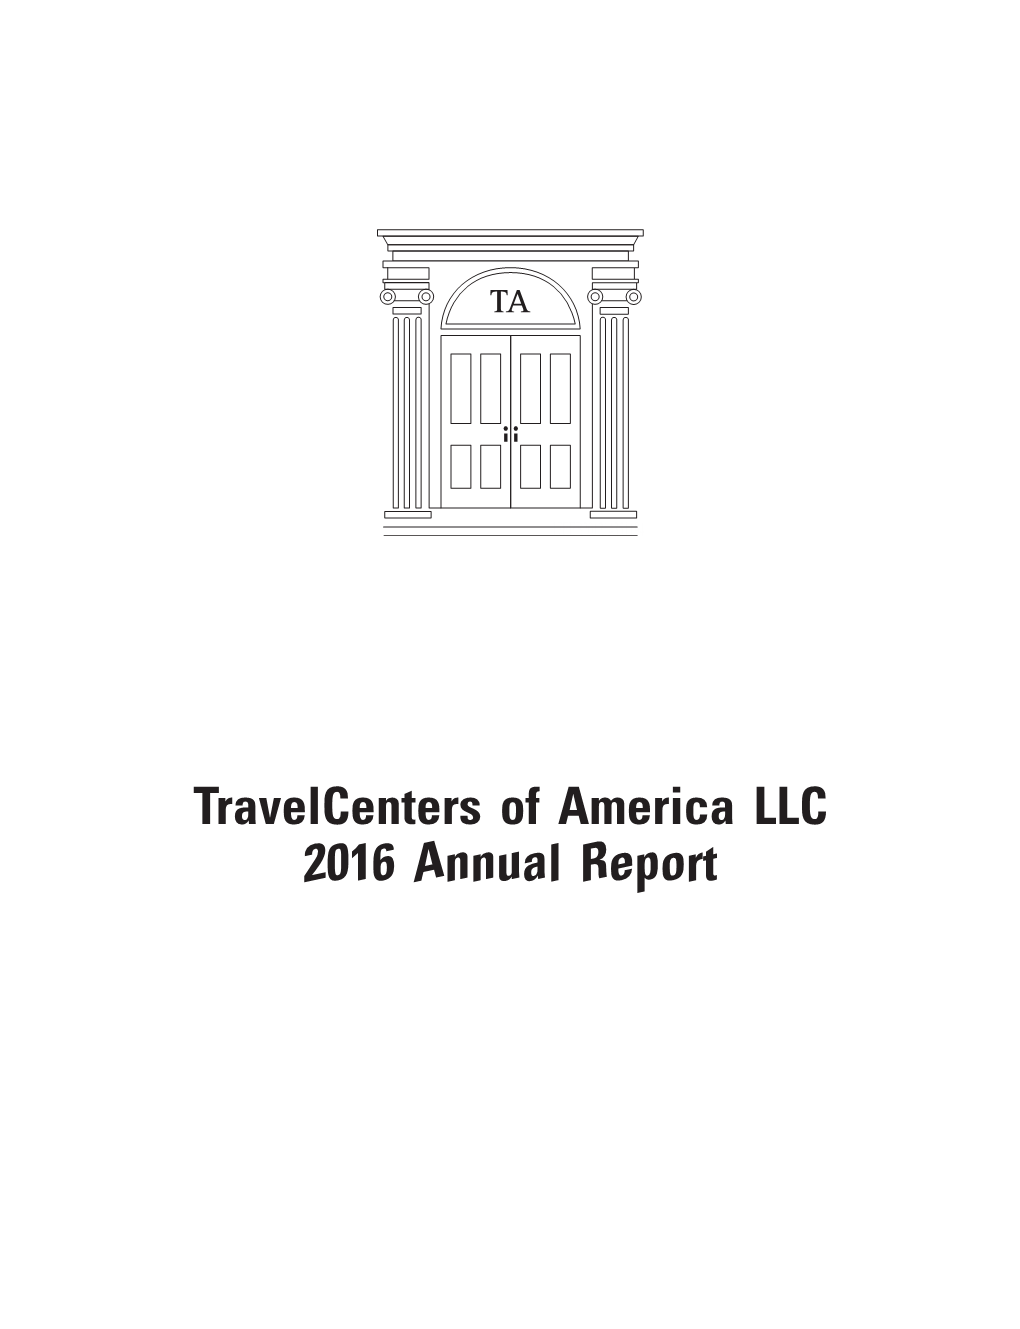 Travelcenters of America LLC 2016 Annual Report